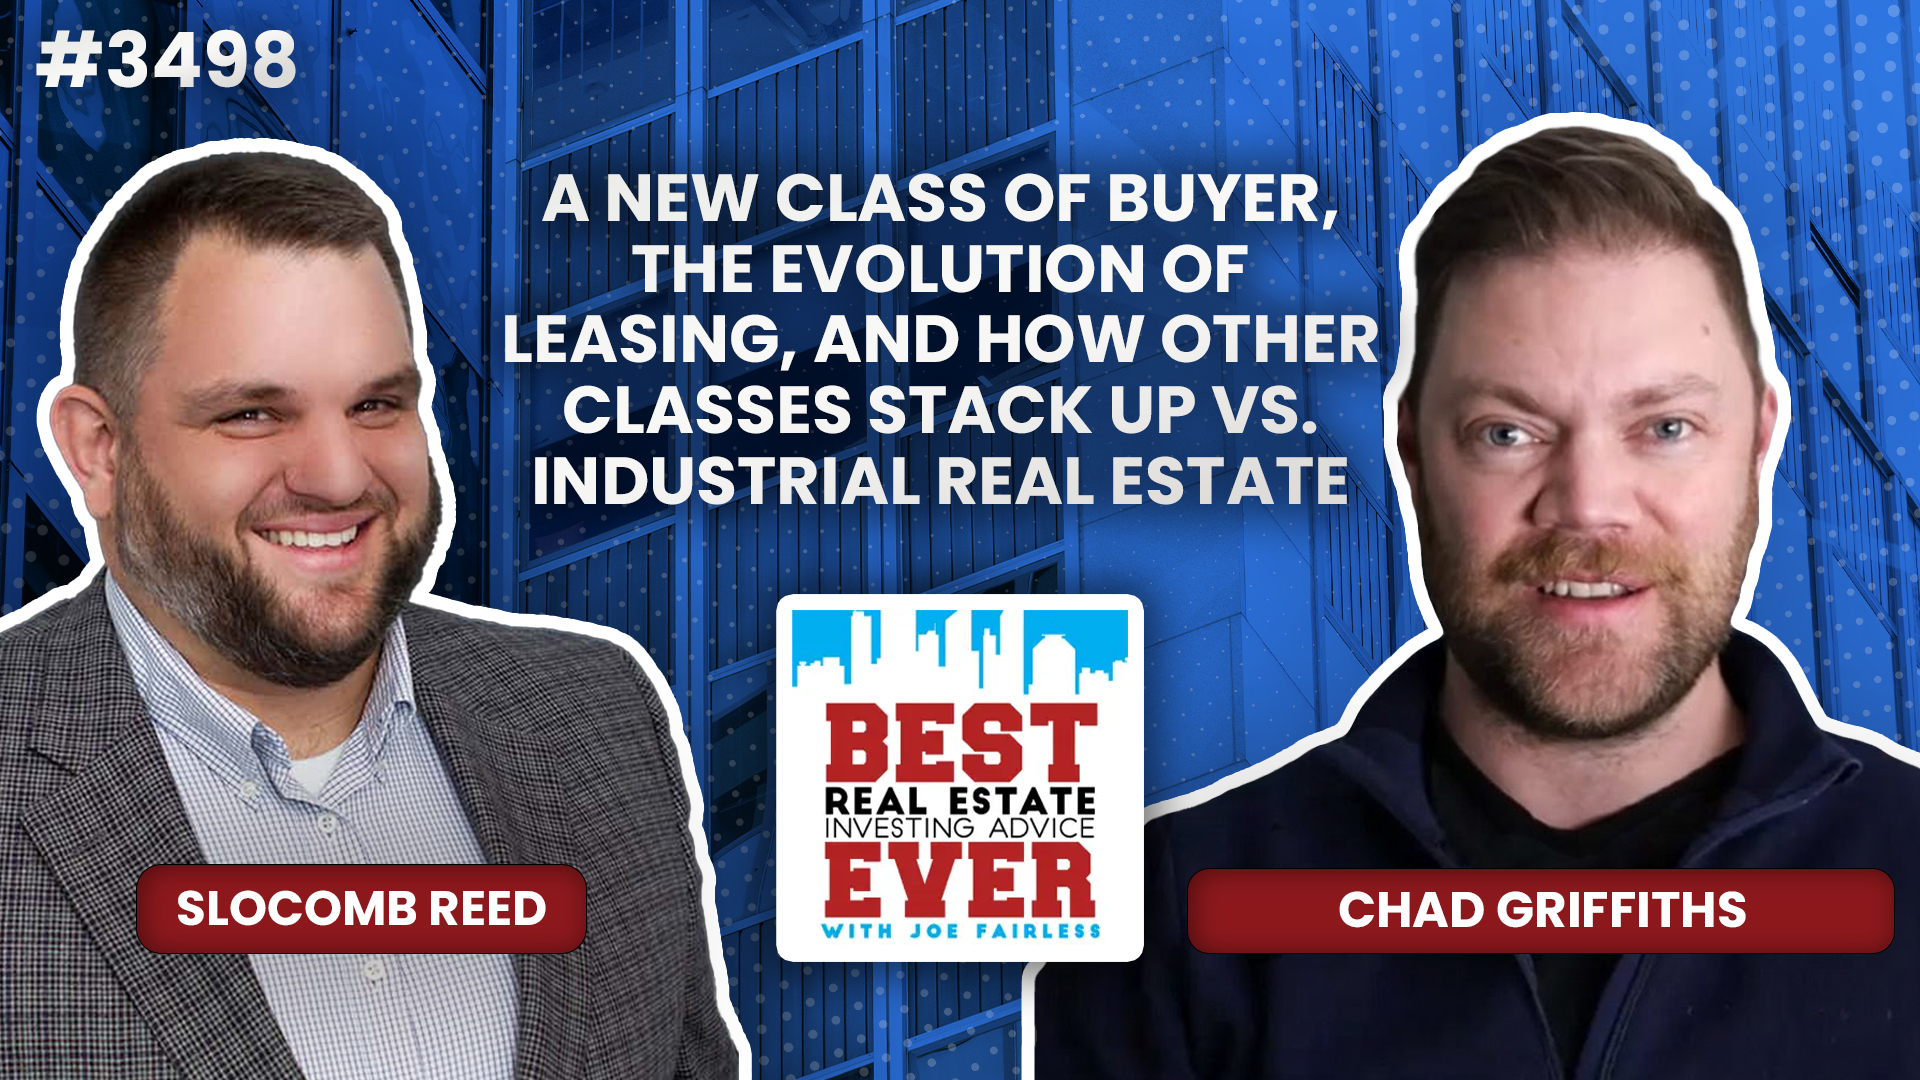 JF3498: A New Class of Buyer, the Evolution of Leasing, and How Other Classes Stack Up vs. Industrial Real Estate ft. Chad Griffiths